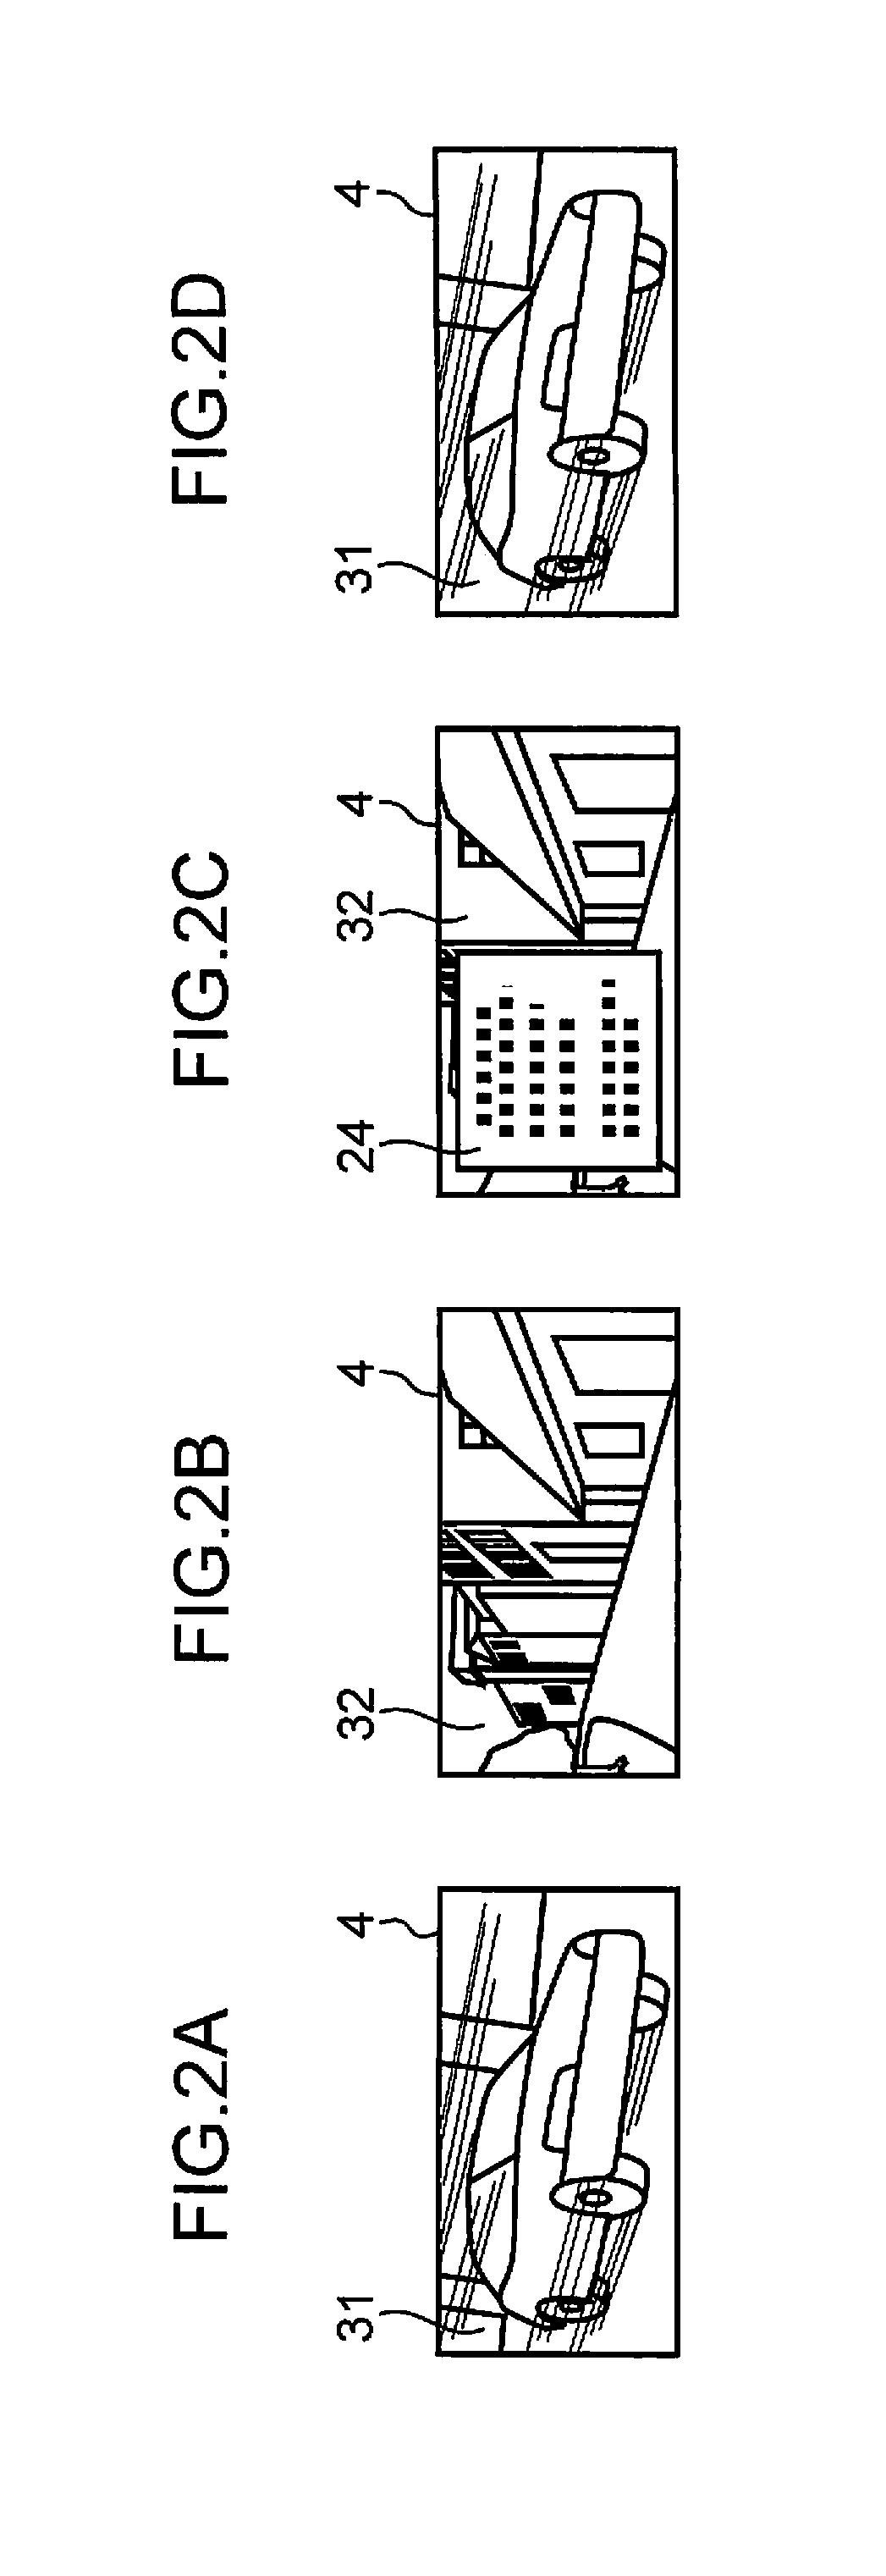 Display control device and display control method